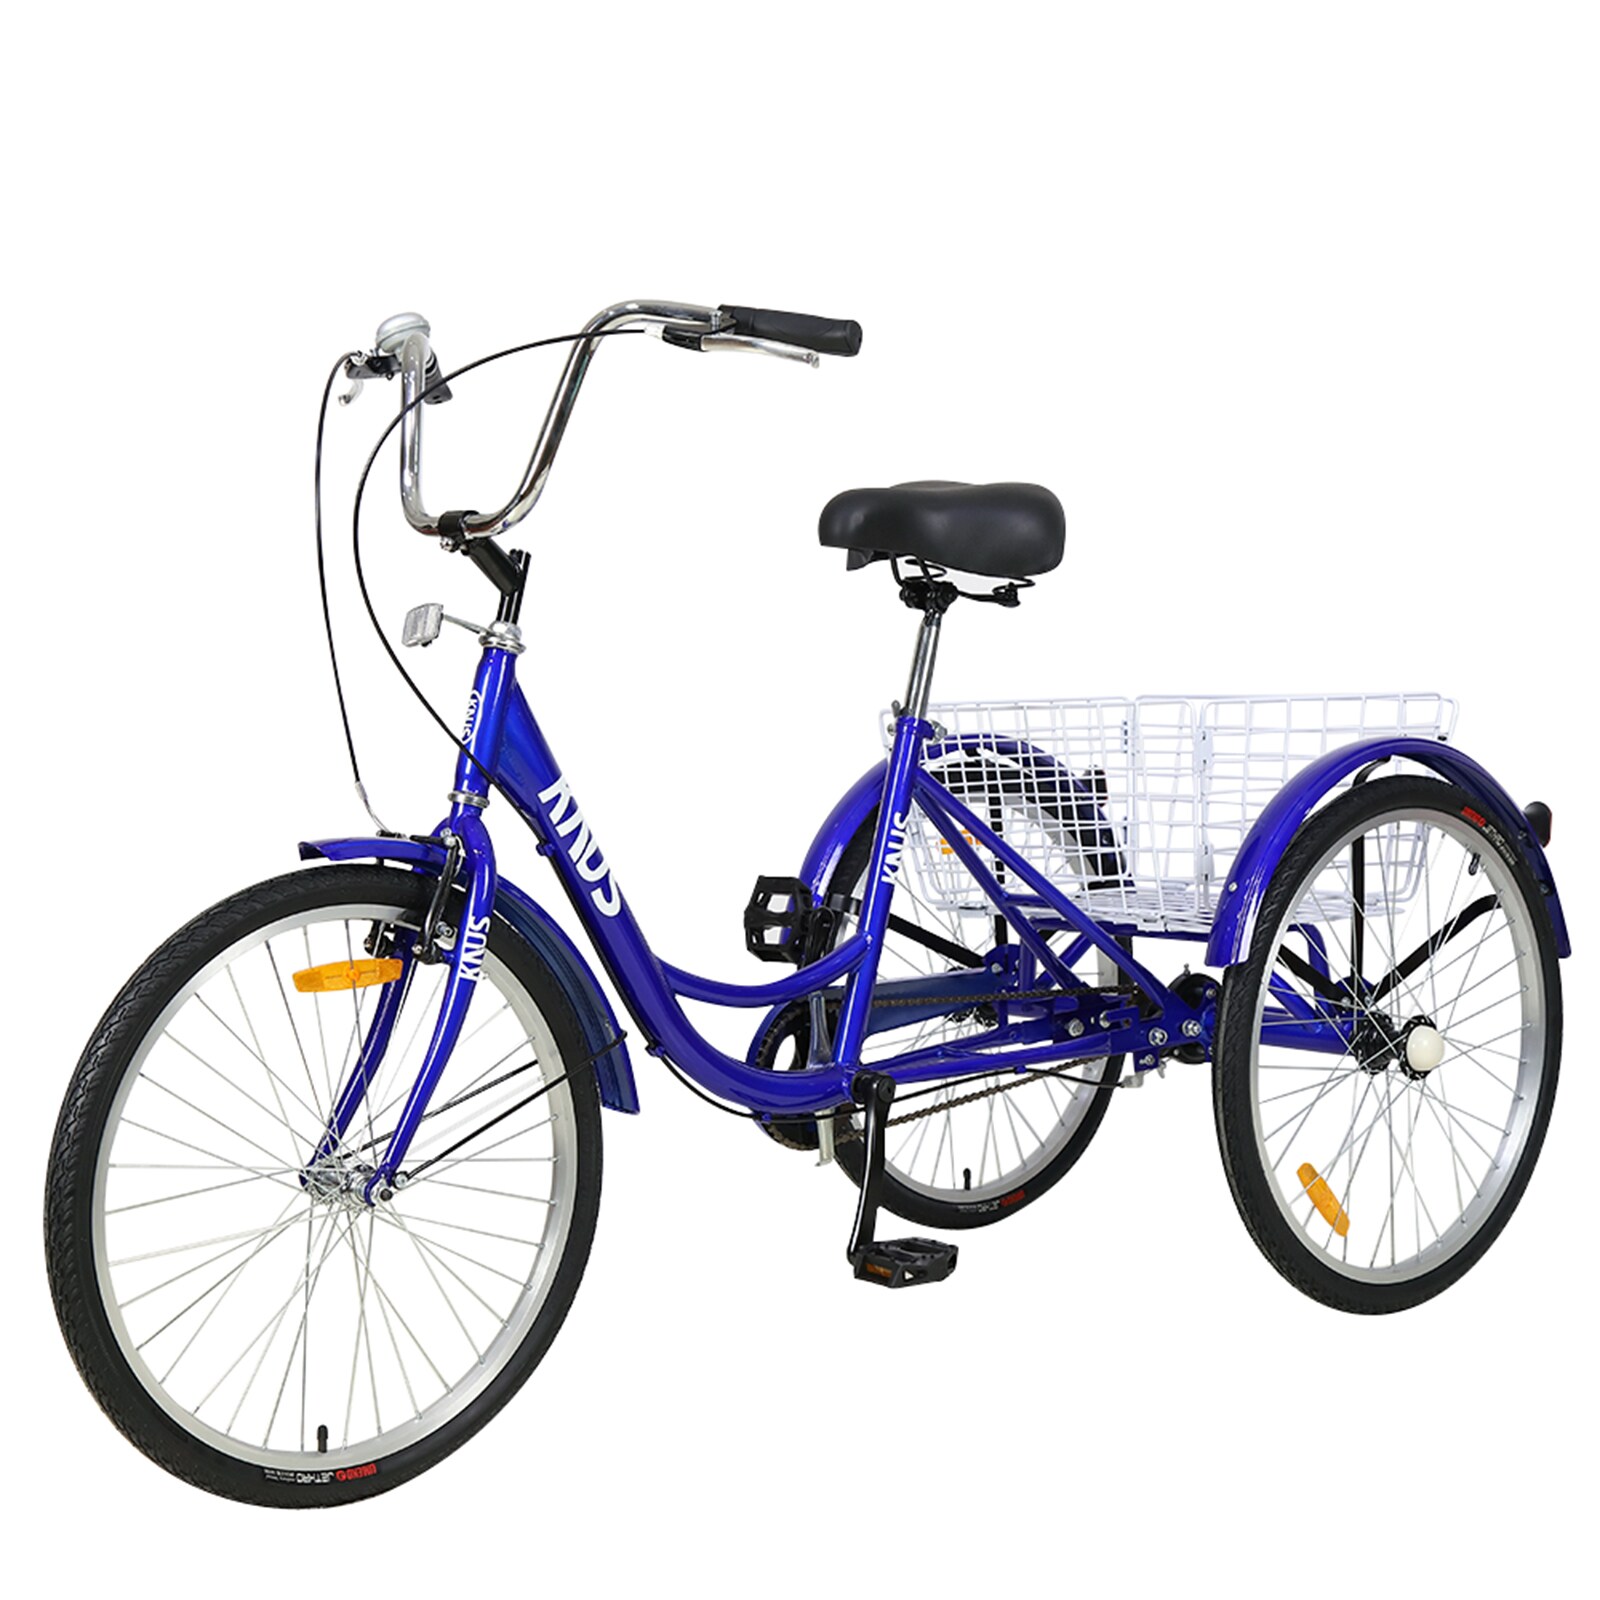 Large 26-in Wheel Size Adult Unisex Tricycle with Big Back Basket - Rigid Suspension, High-Strength Steel Frame | - Maocao Hoom MZH52730